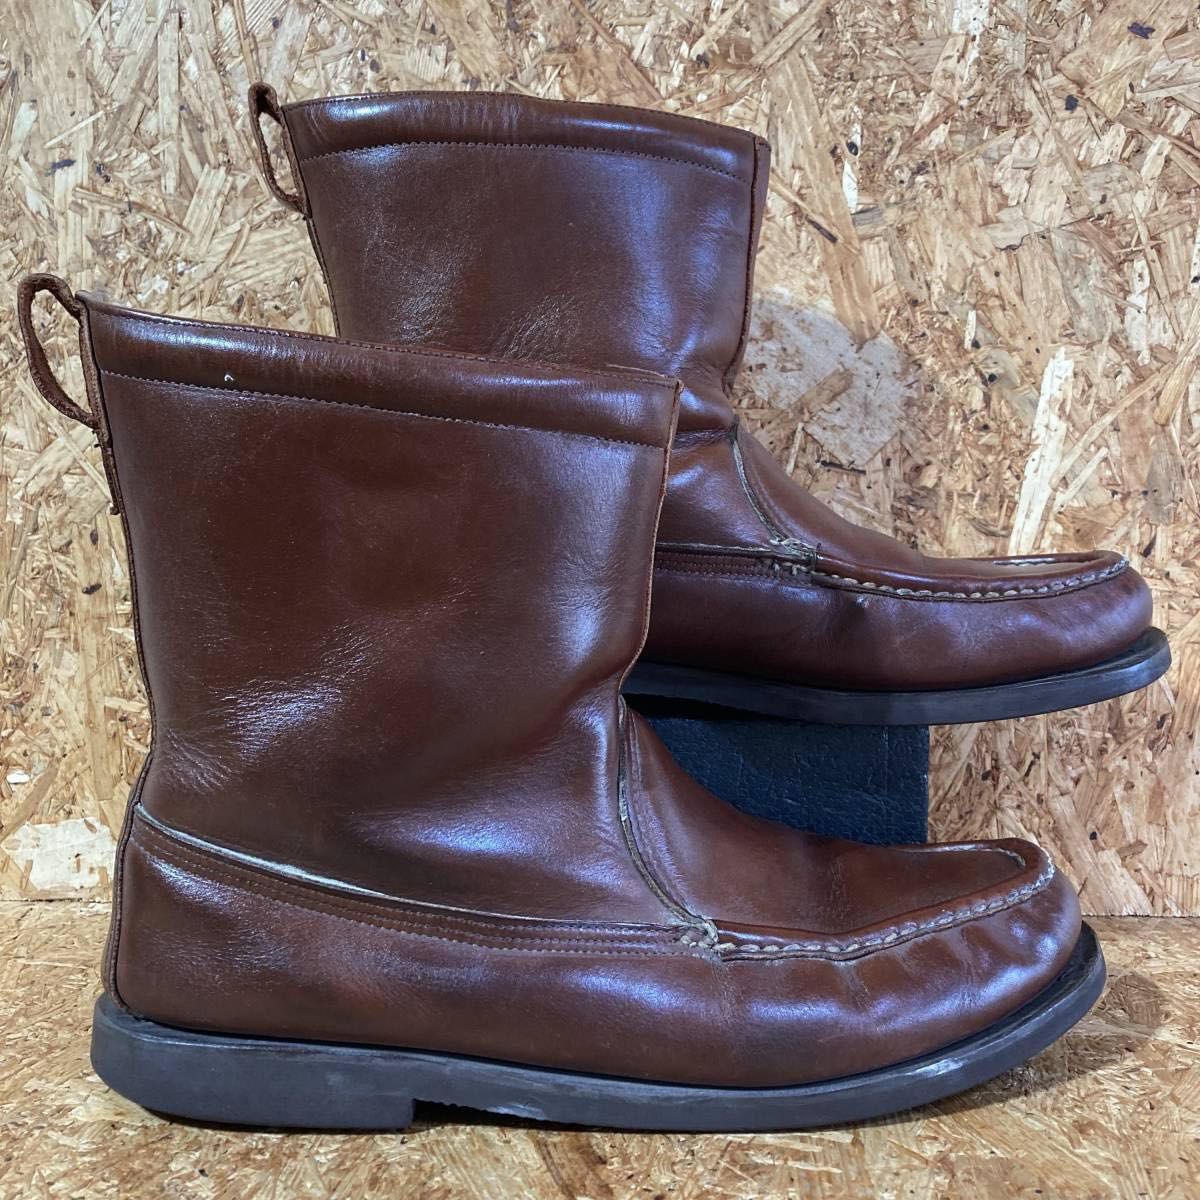 RUSSELL MOCCASIN HUNTING WORLD Knock About Boots 12 コラボ 別注 限定